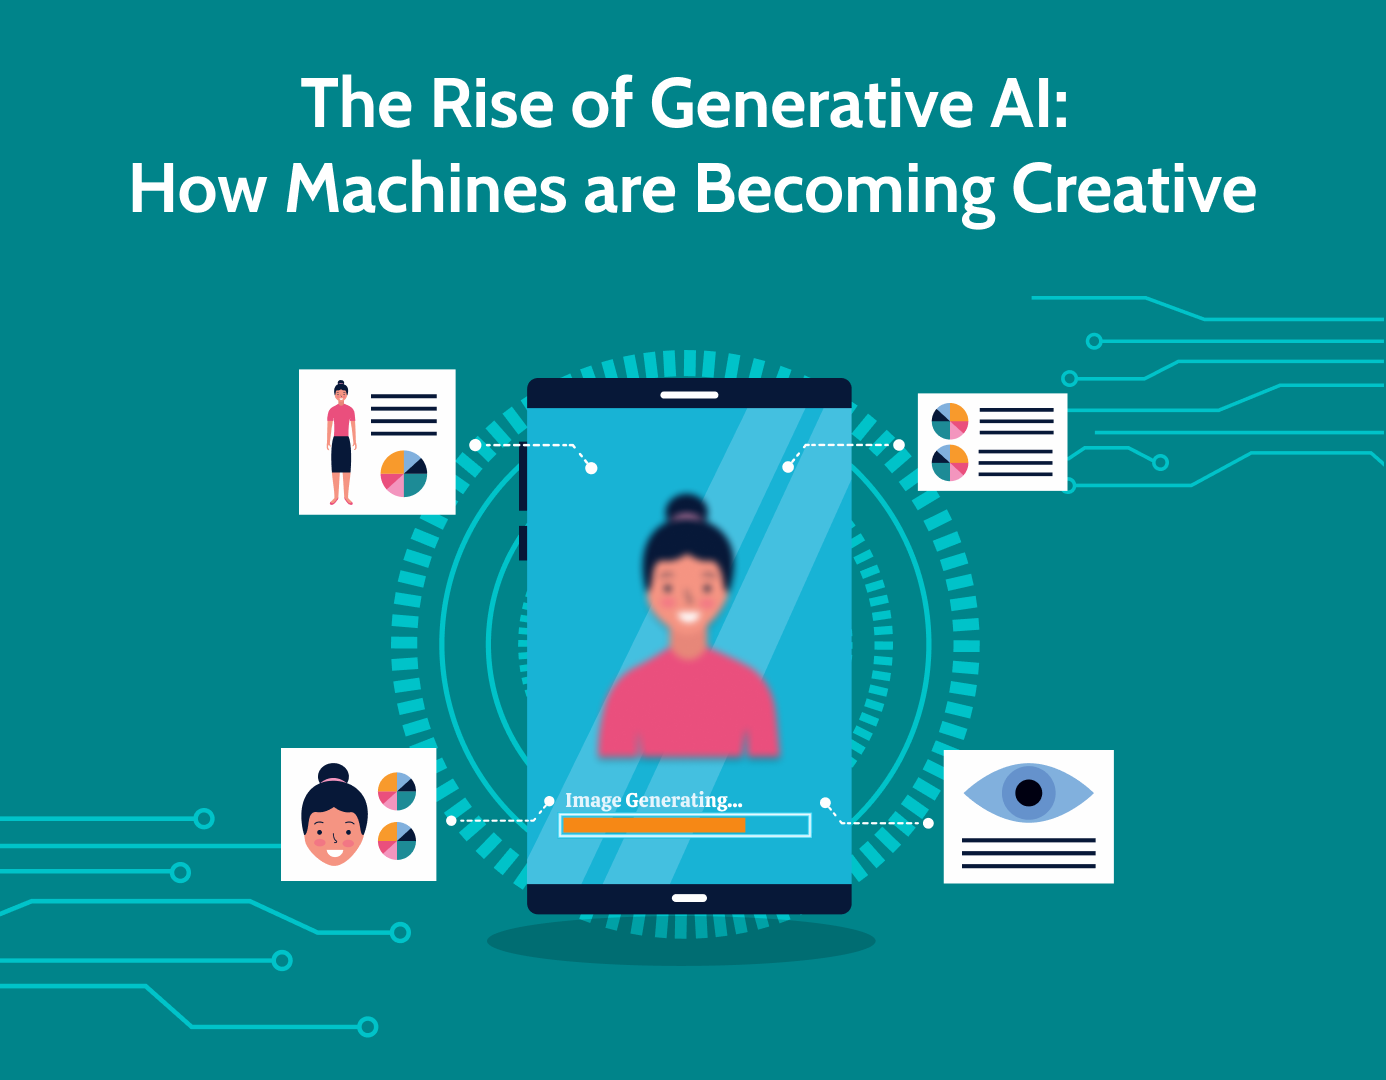 Illustration depicting the diverse applications of Generative AI in transforming industries and creativity.